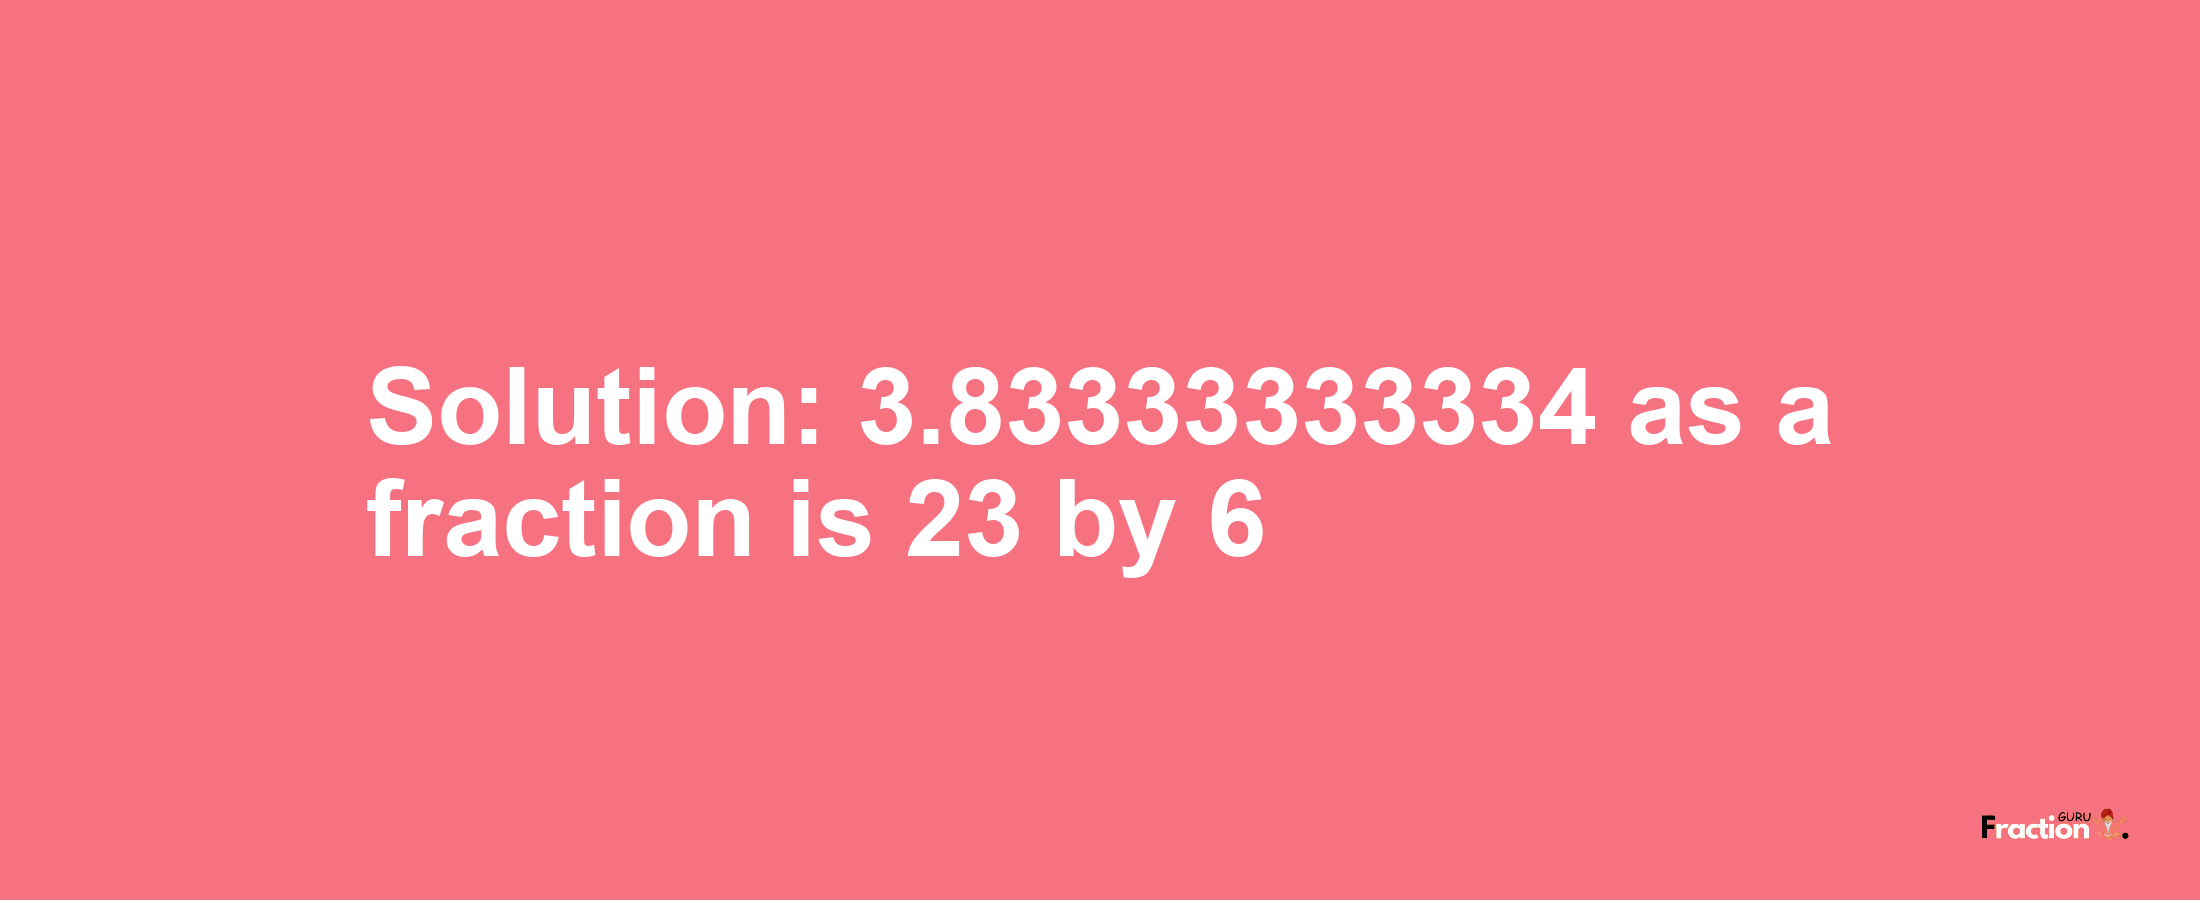 Solution:3.83333333334 as a fraction is 23/6